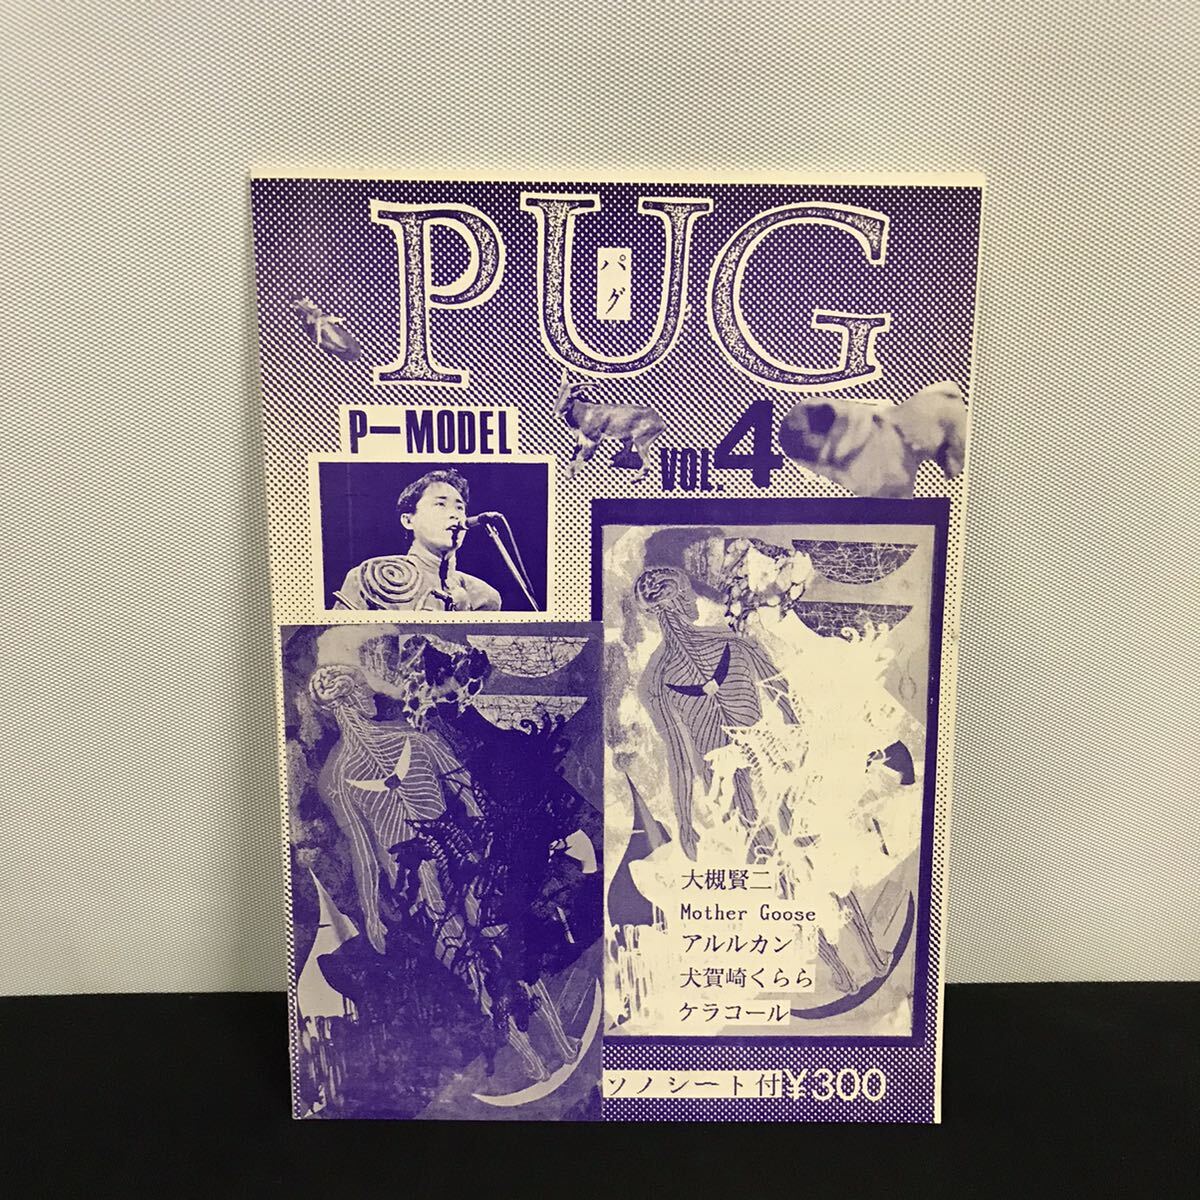 E1900 is # PUG Pug 1988 year 3 month issue VOL.4